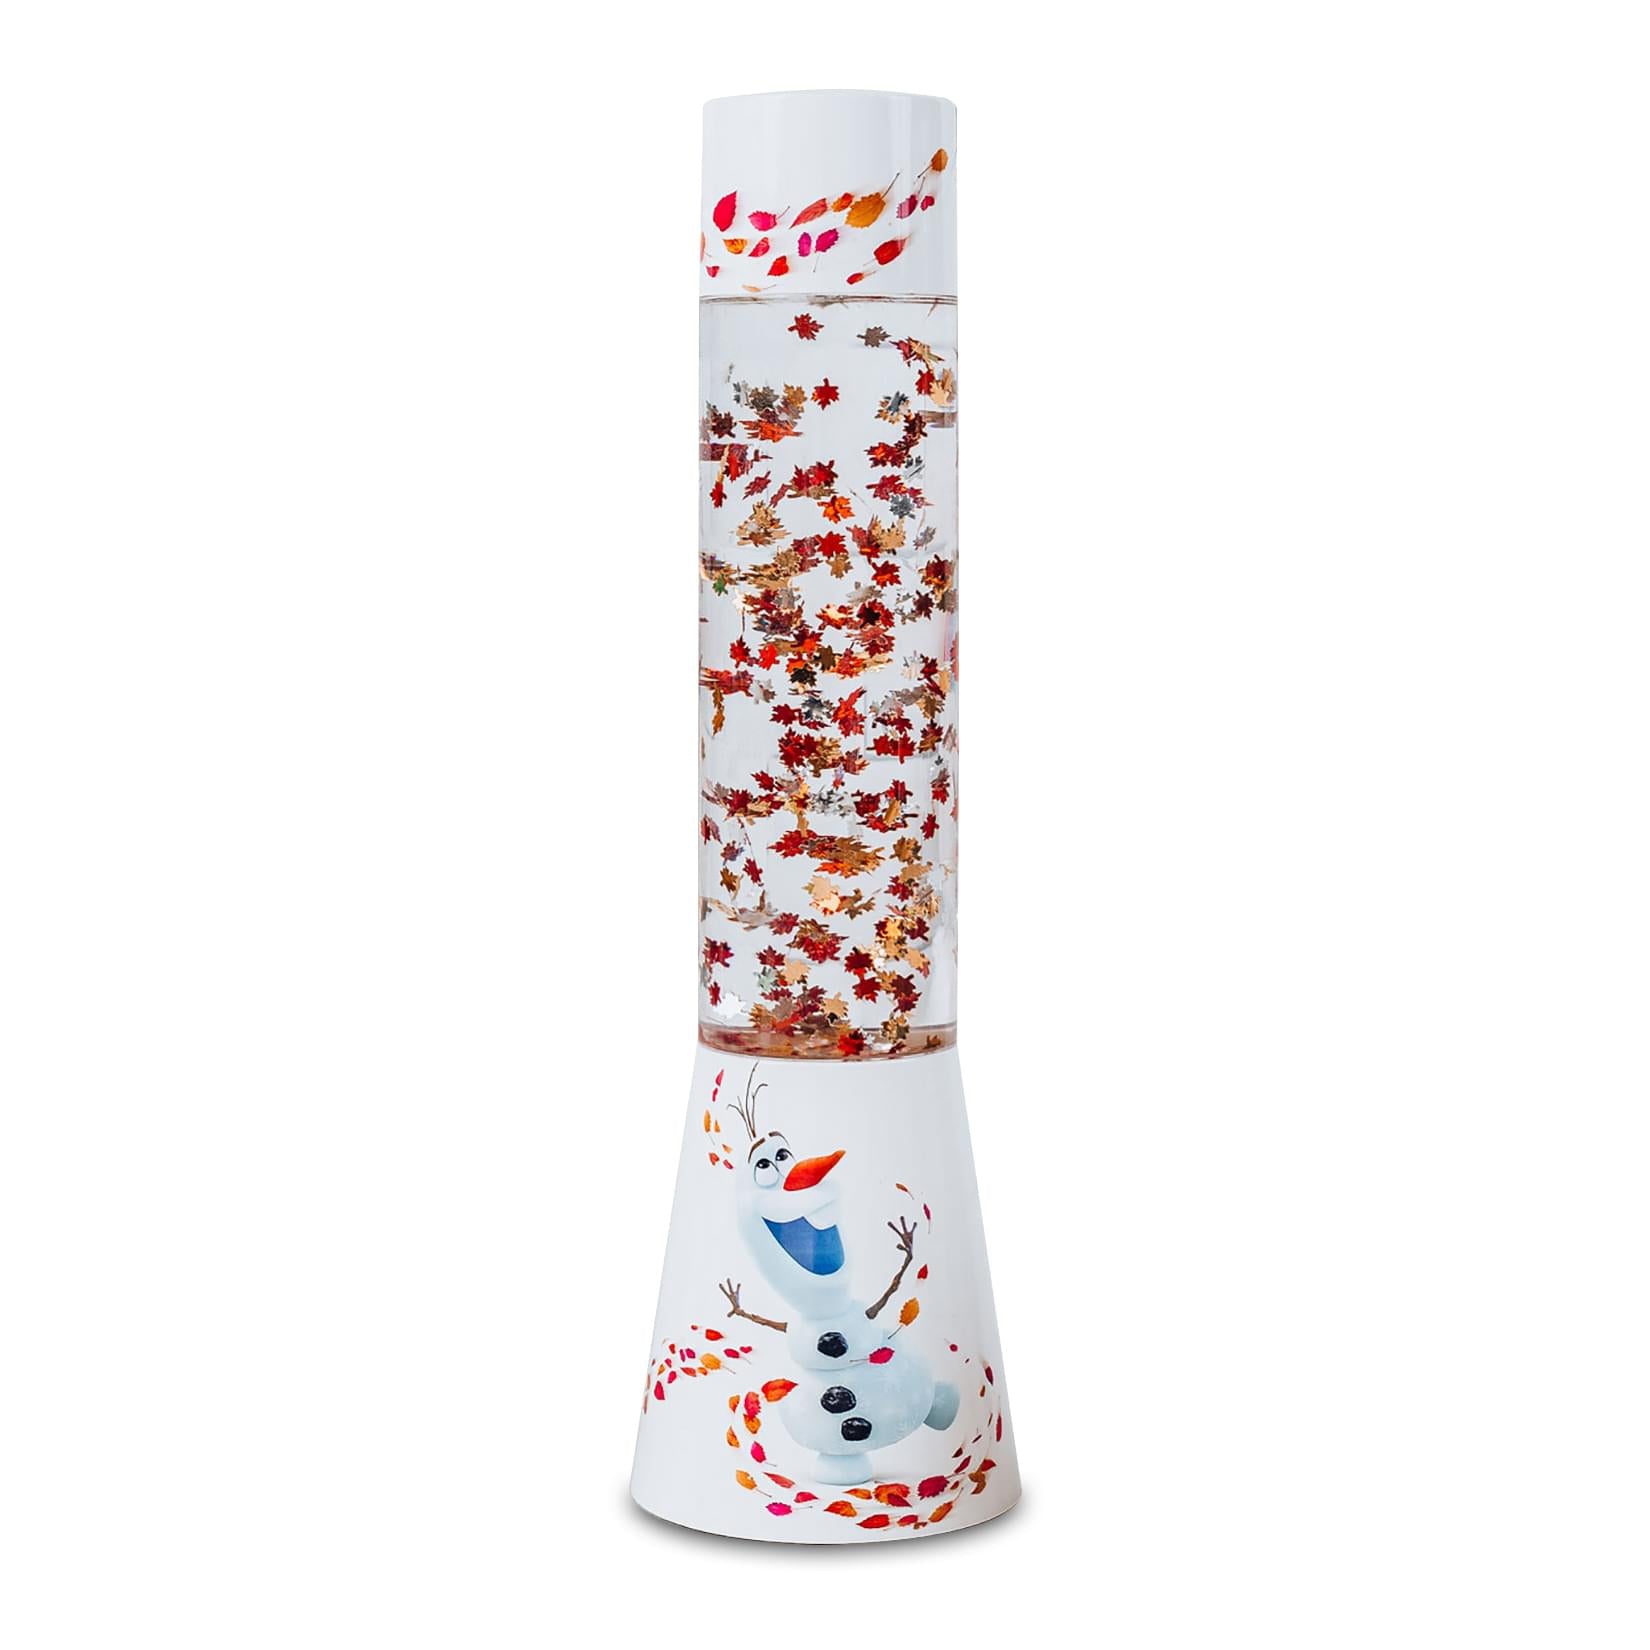 Disney Frozen 2 Olaf Glitter Motion Lamp | 12 Inches Tall